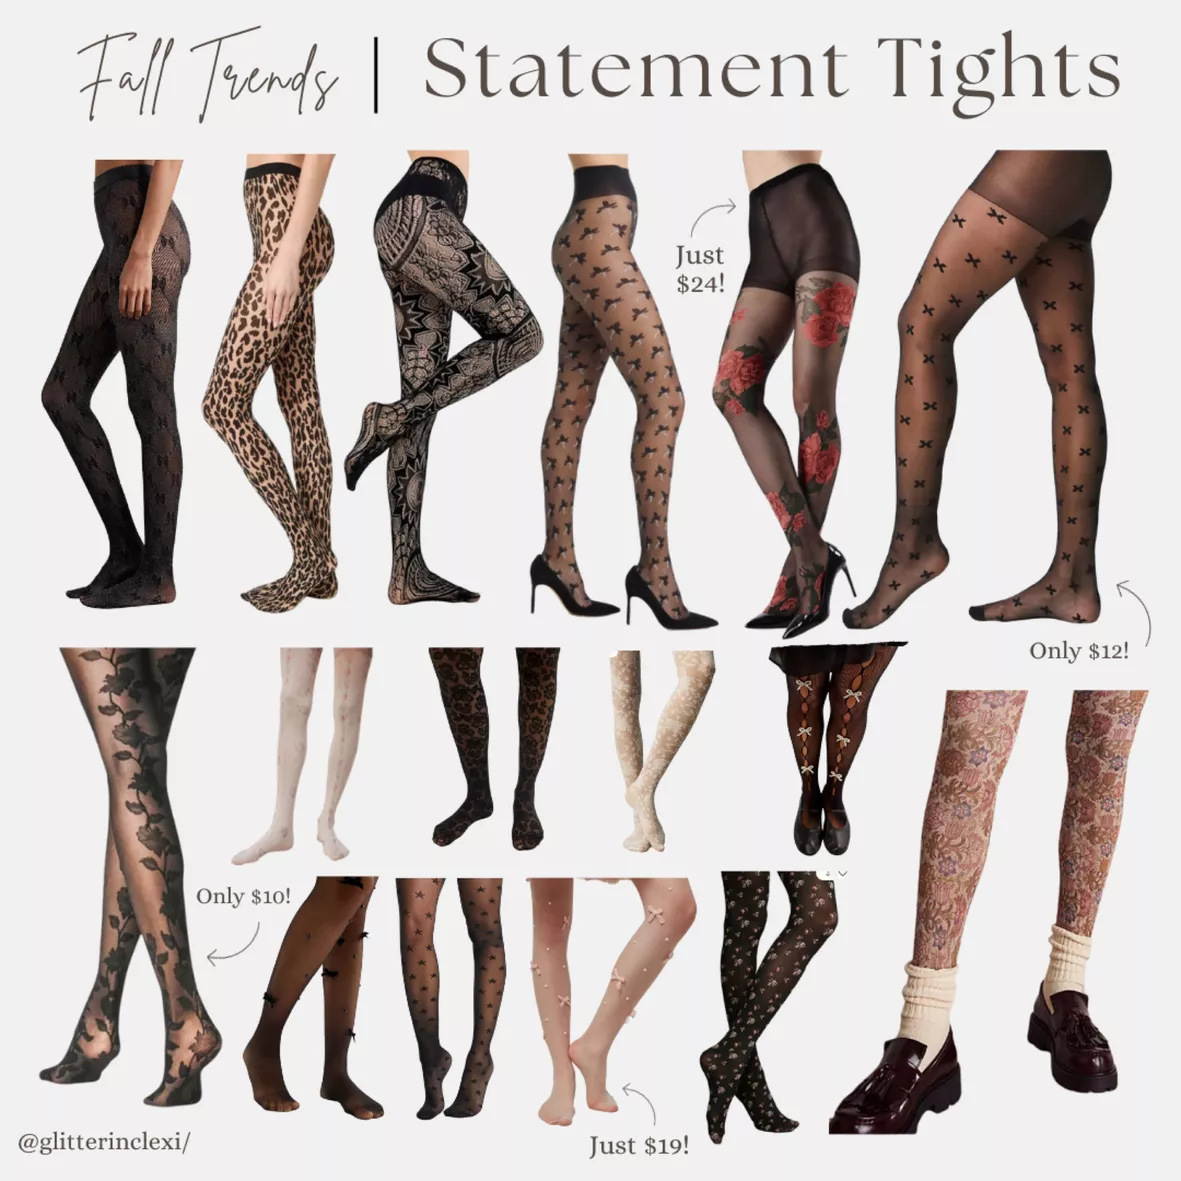 Statement Tights Are Taking Over This Fall